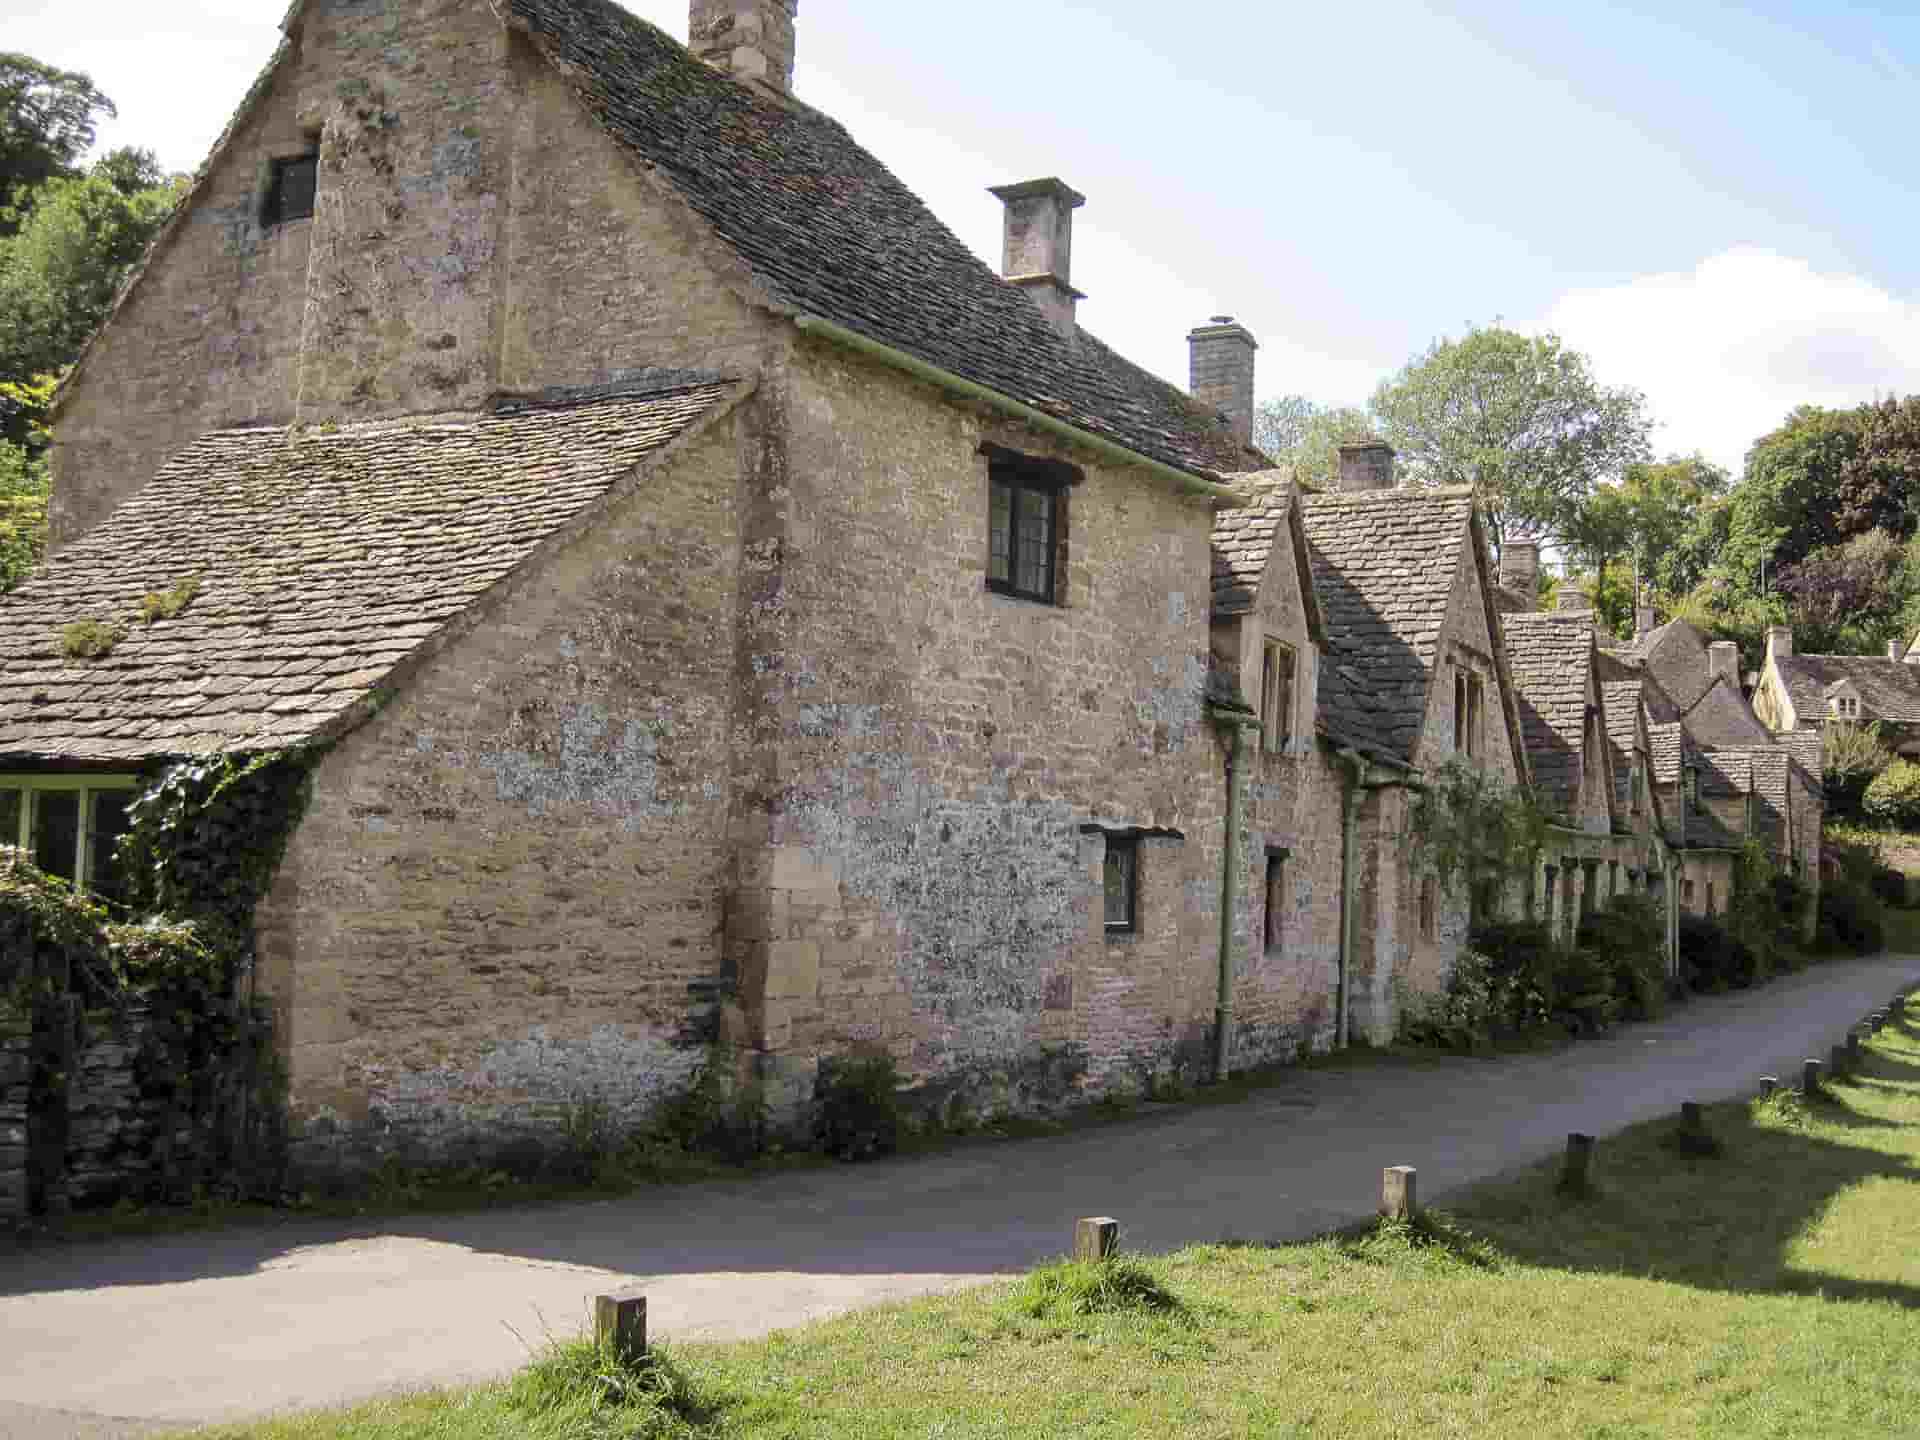 A rural, stone built row of houses in the coutryside